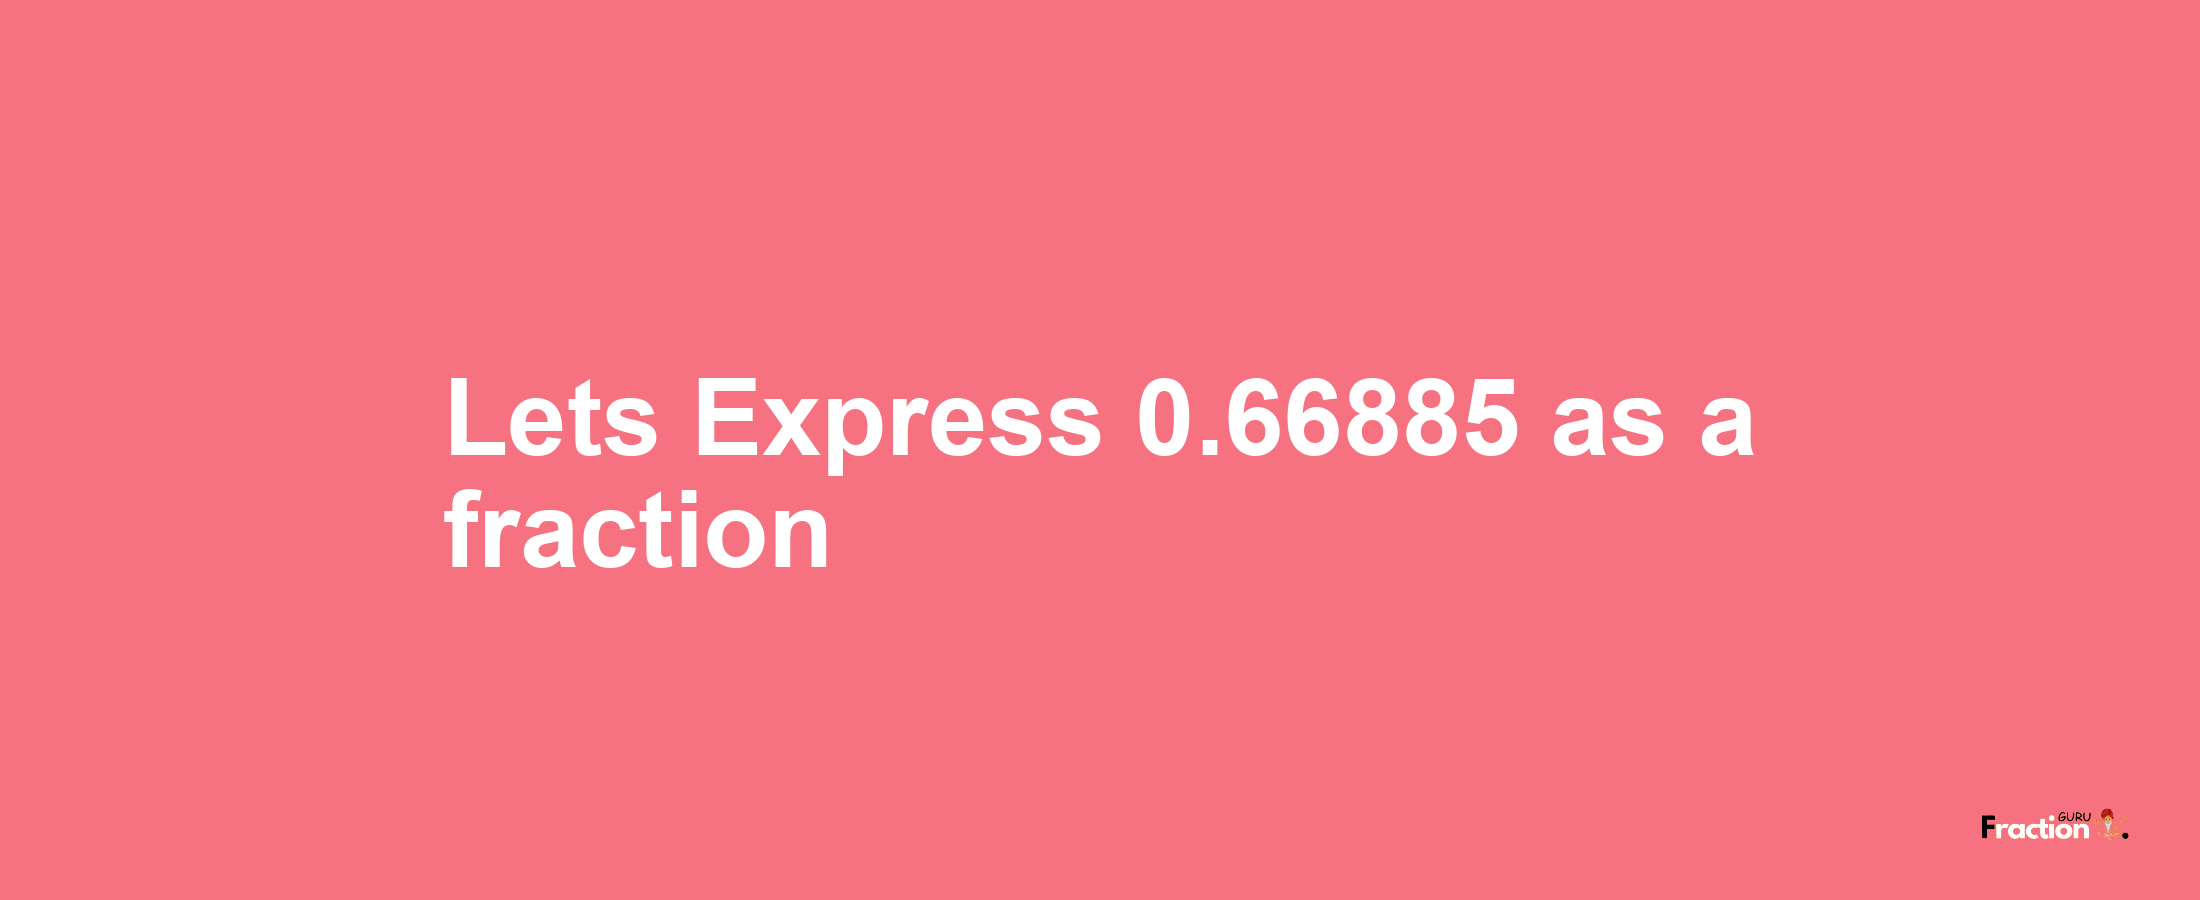 Lets Express 0.66885 as afraction